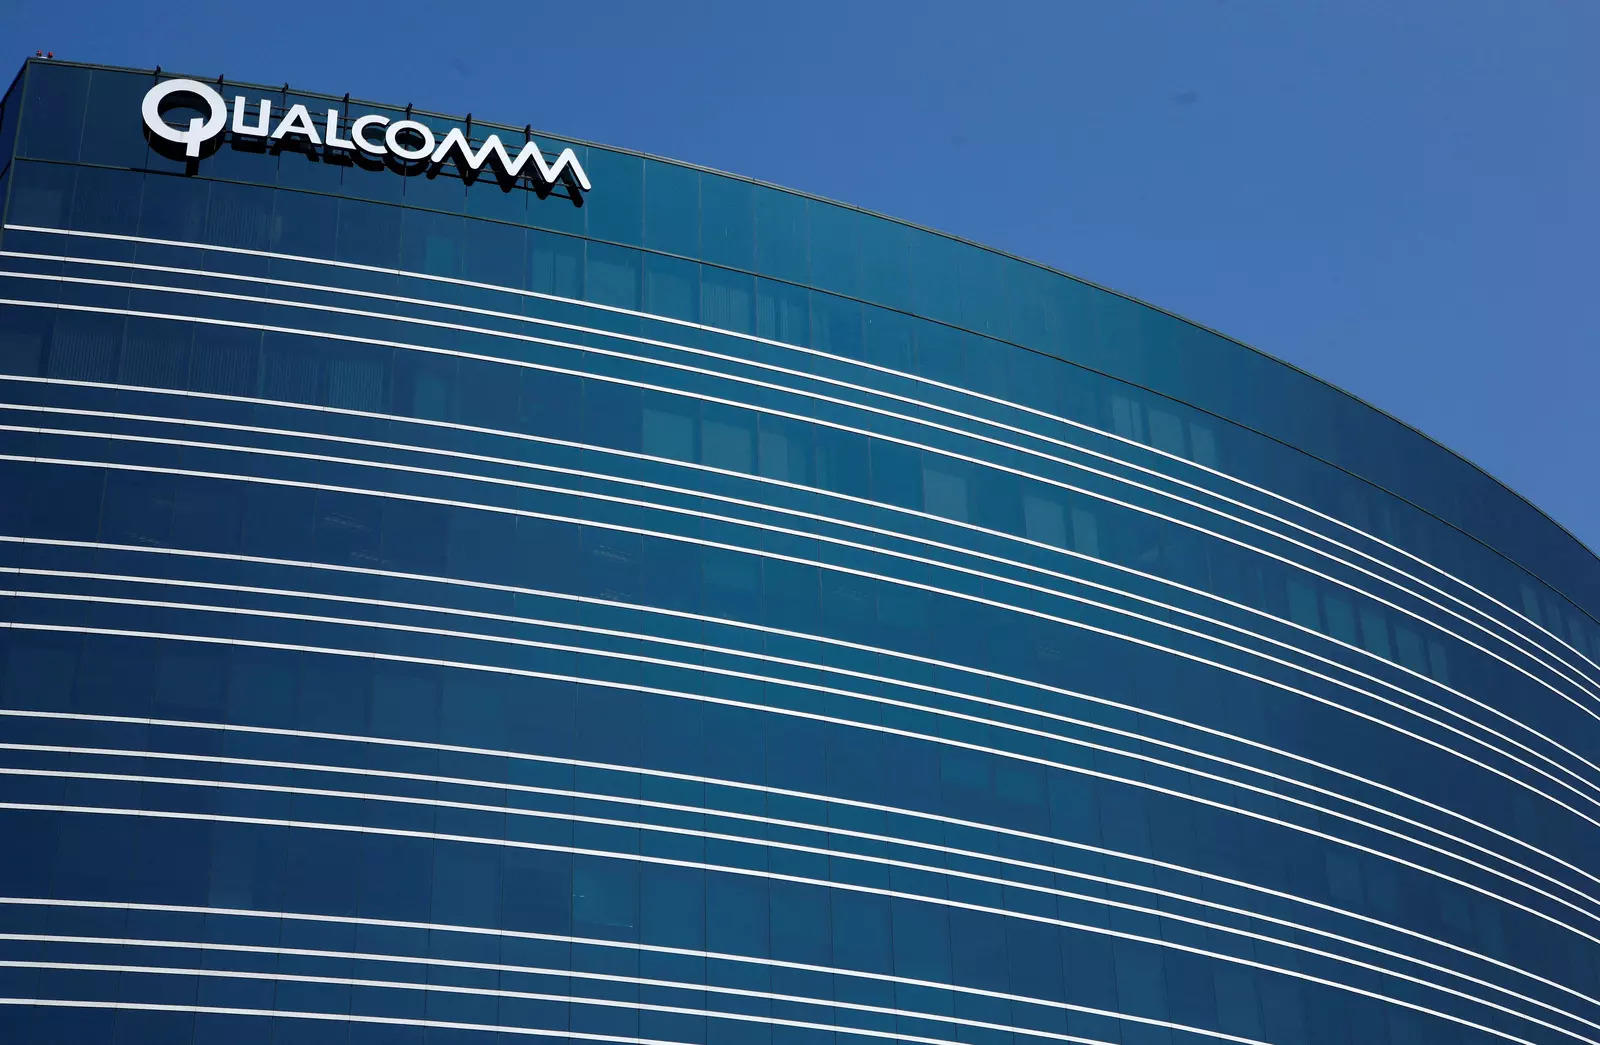  FILE PHOTO: A view of one of Qualcomm's many buildings in San Diego, California, July 22, 2008. REUTERS/Mike Blake/File Photo